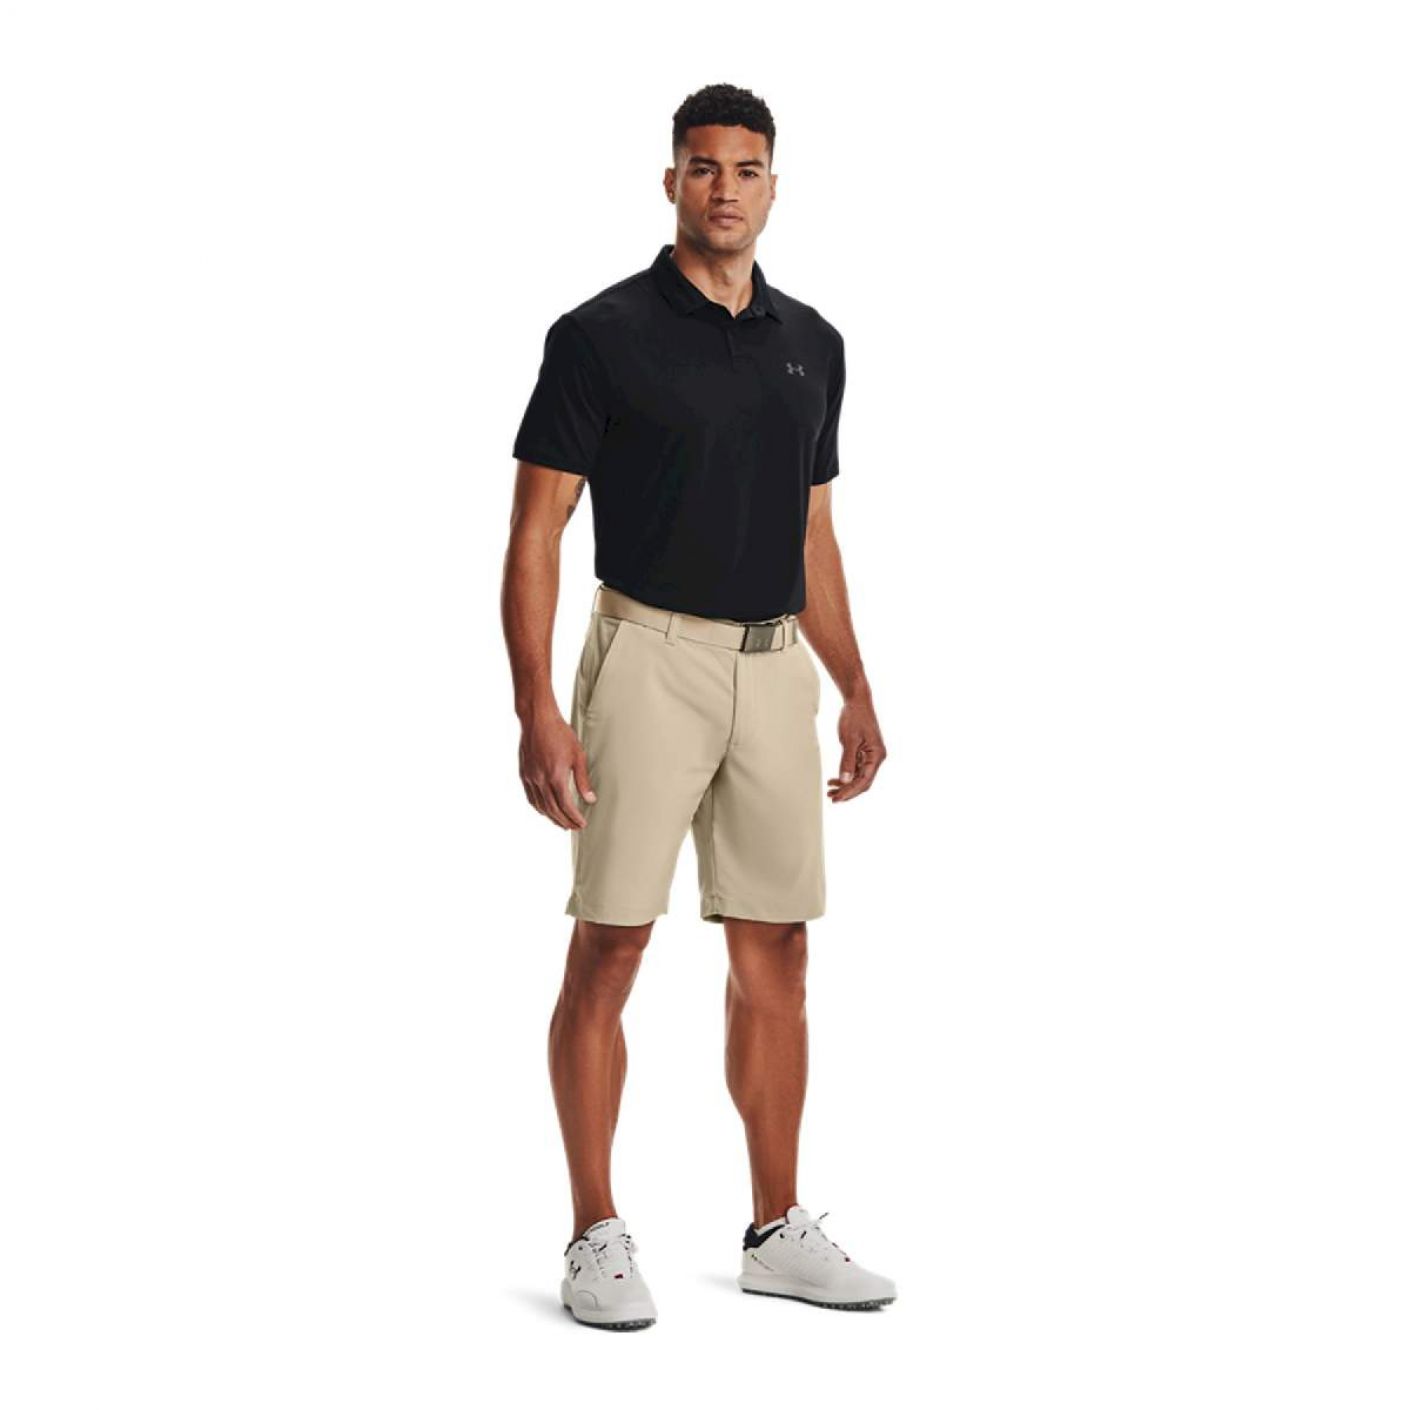 Under Armour Performance Polo 2.0 Nera